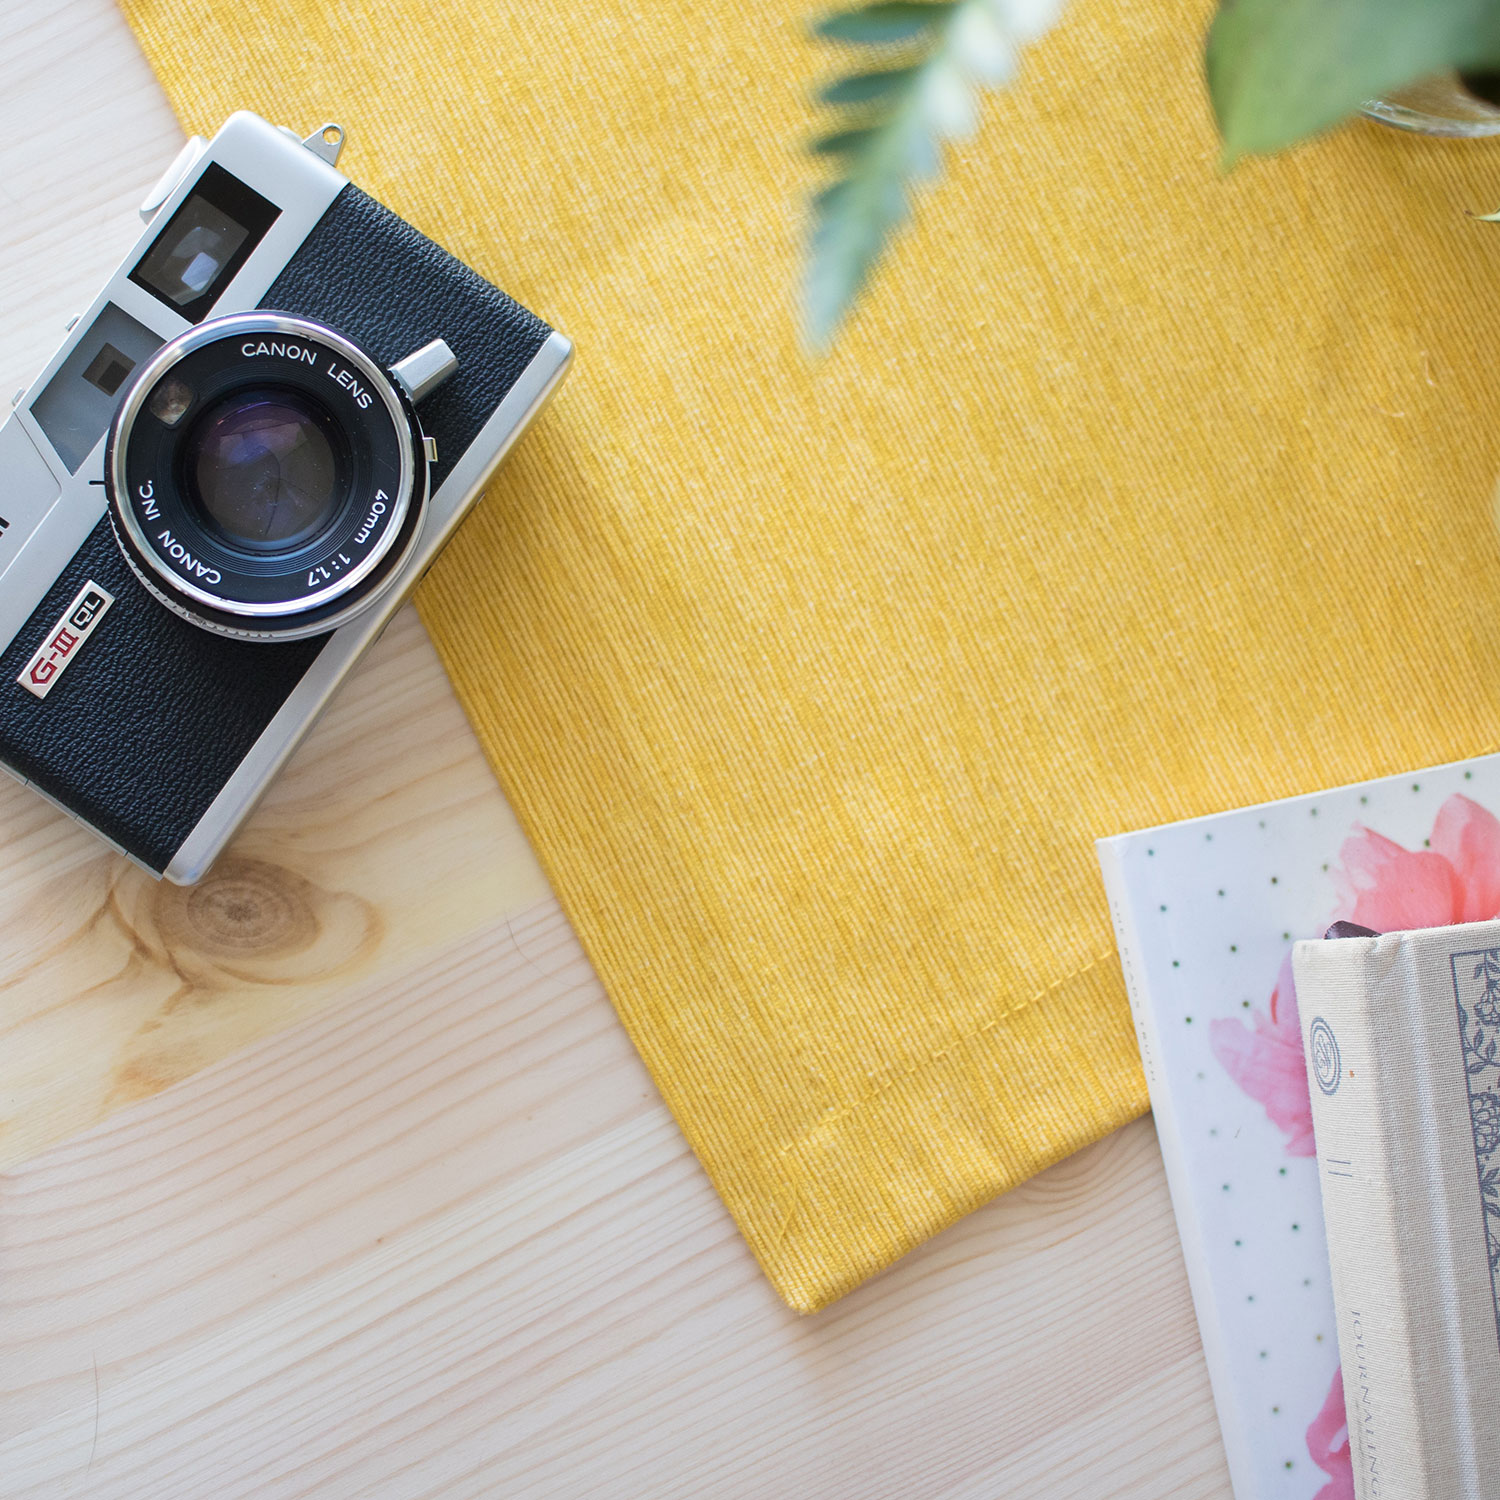 Photo of a camera laying on top of a desk with a bright yellow cloth underneath it